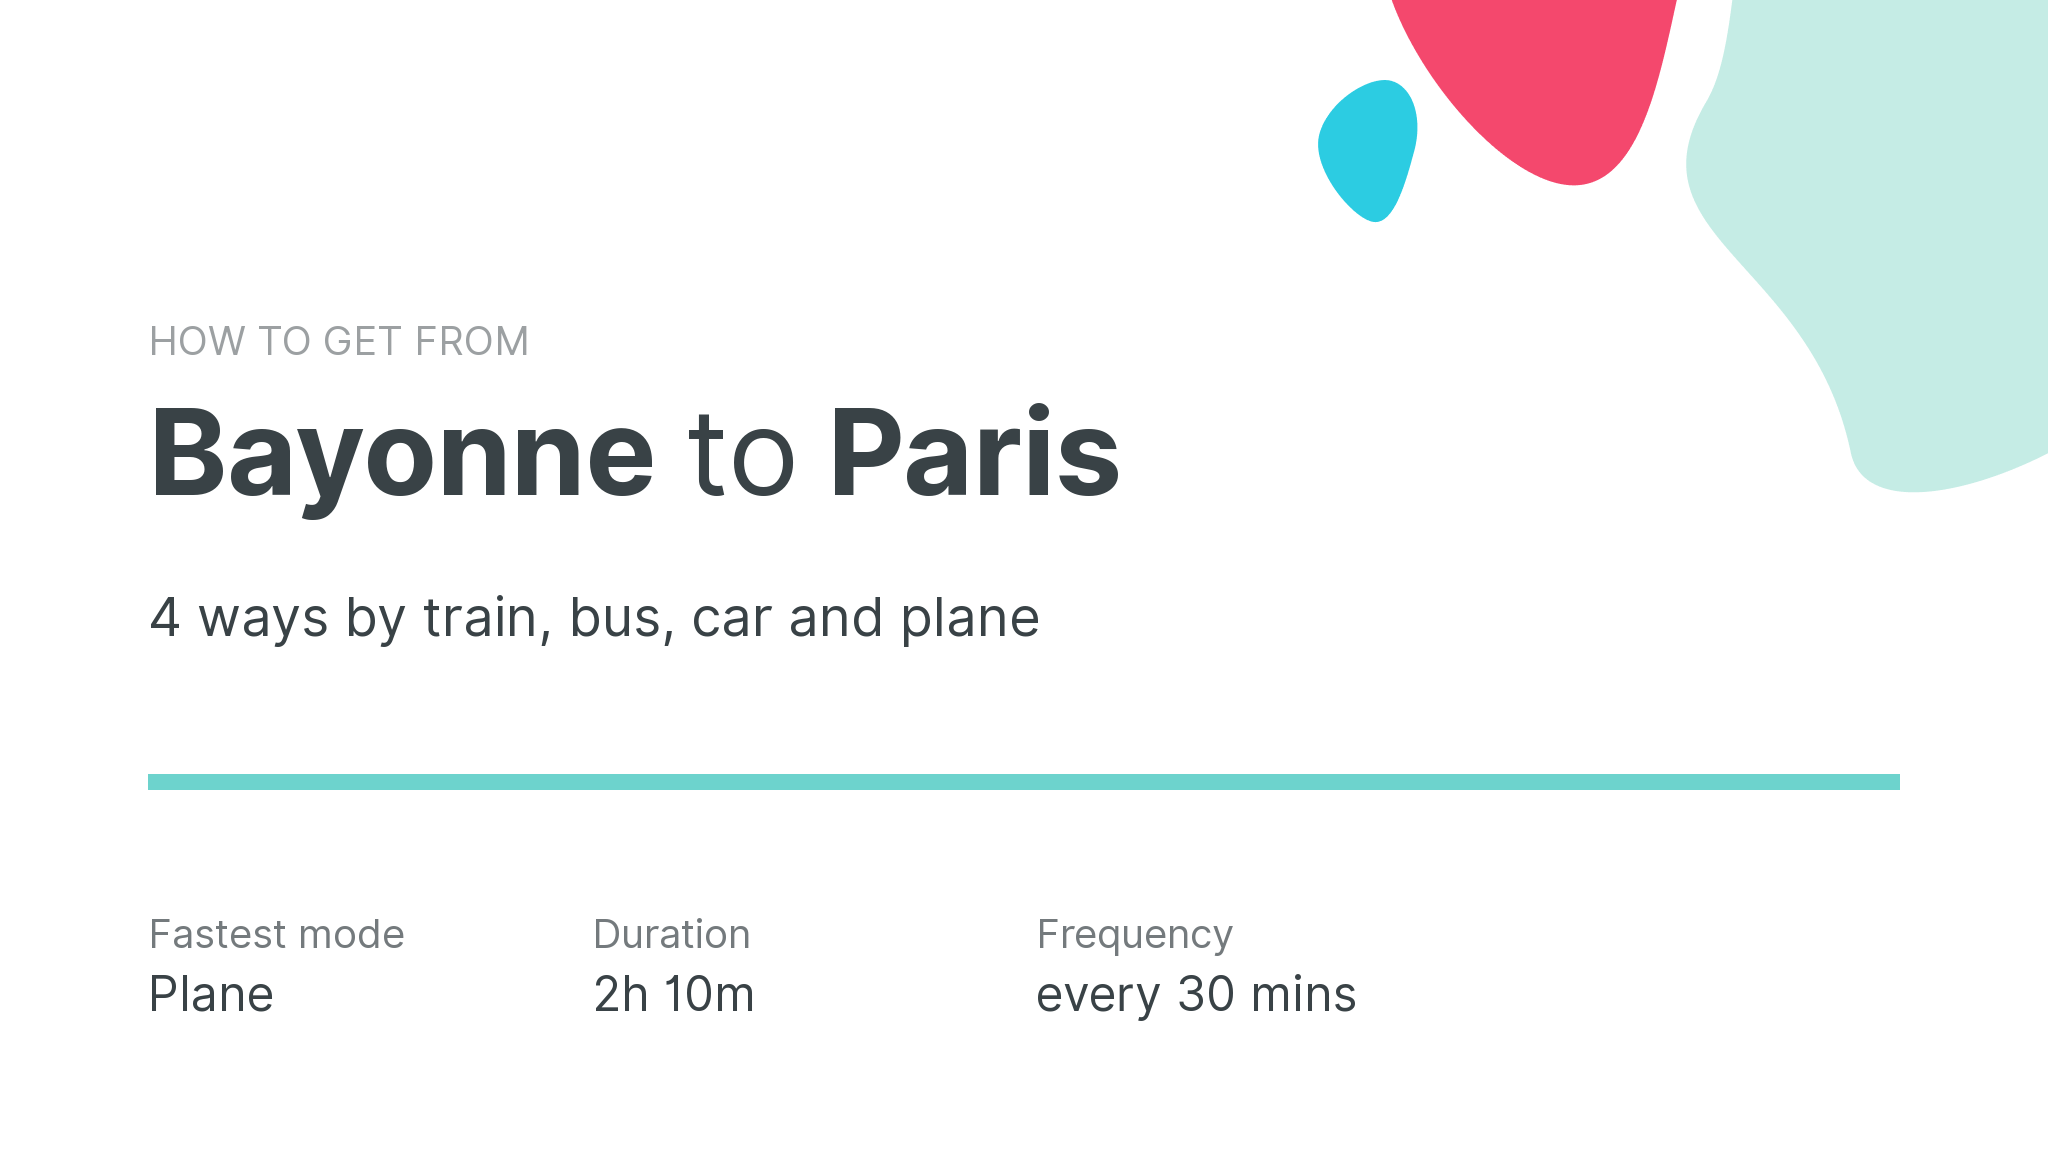 How do I get from Bayonne to Paris